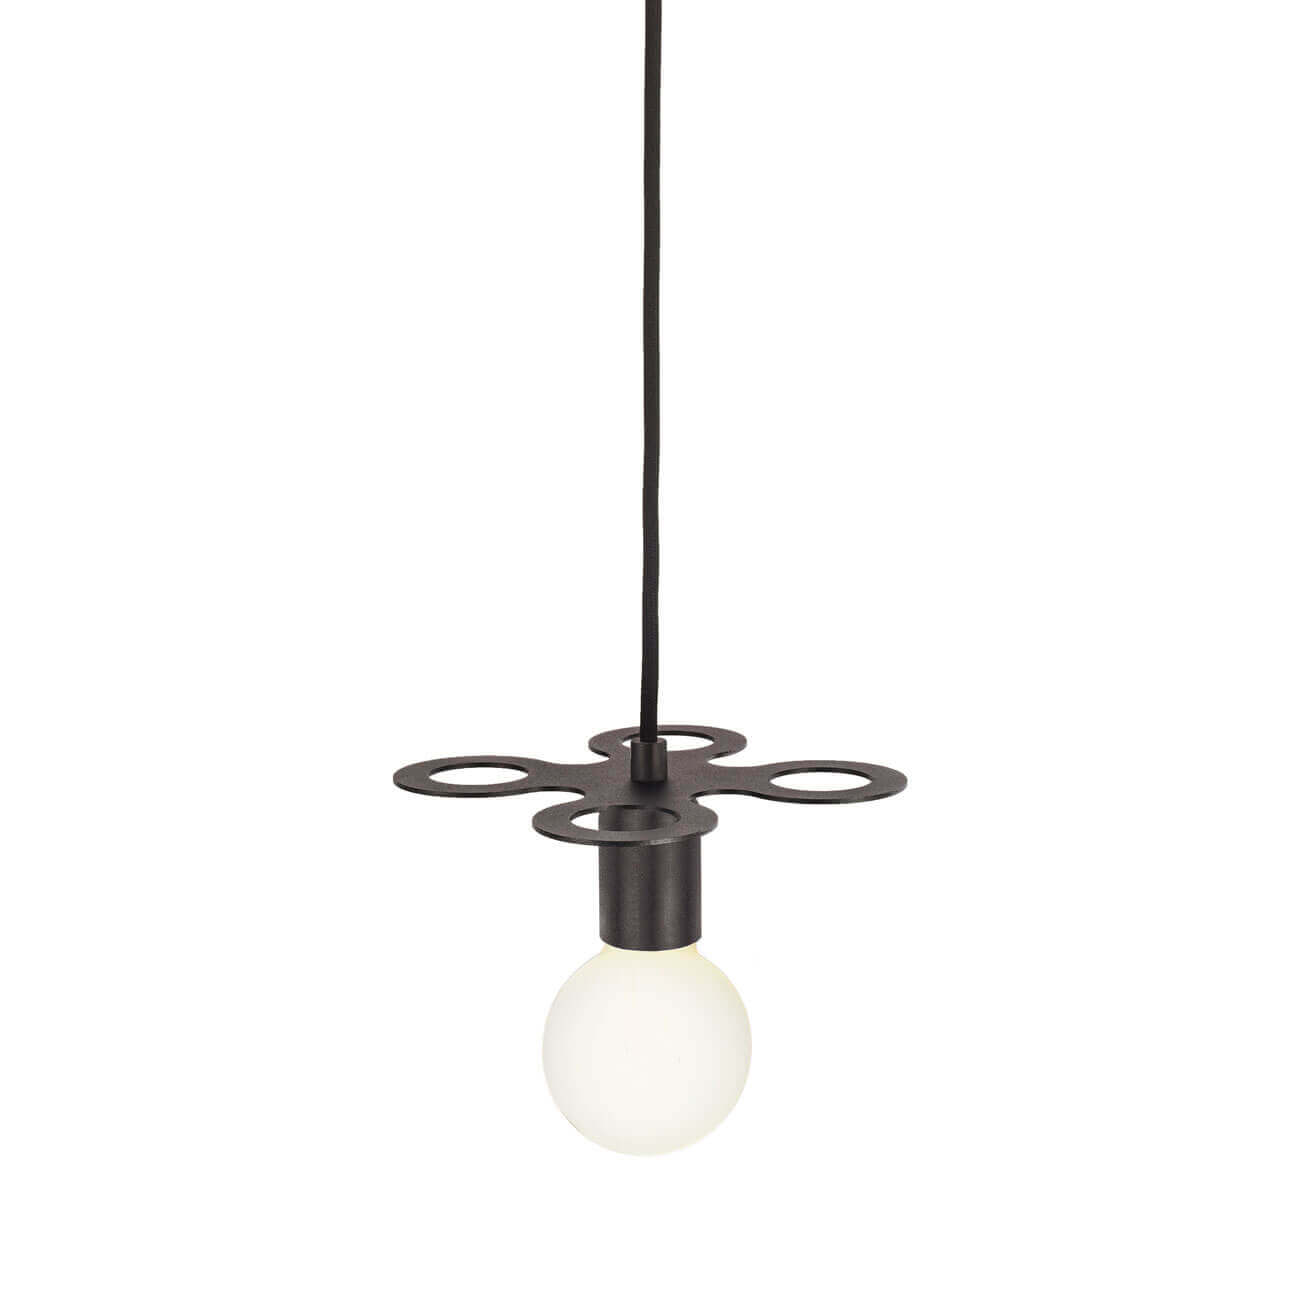 KLAVER suspension lamp, for a nice ambiance